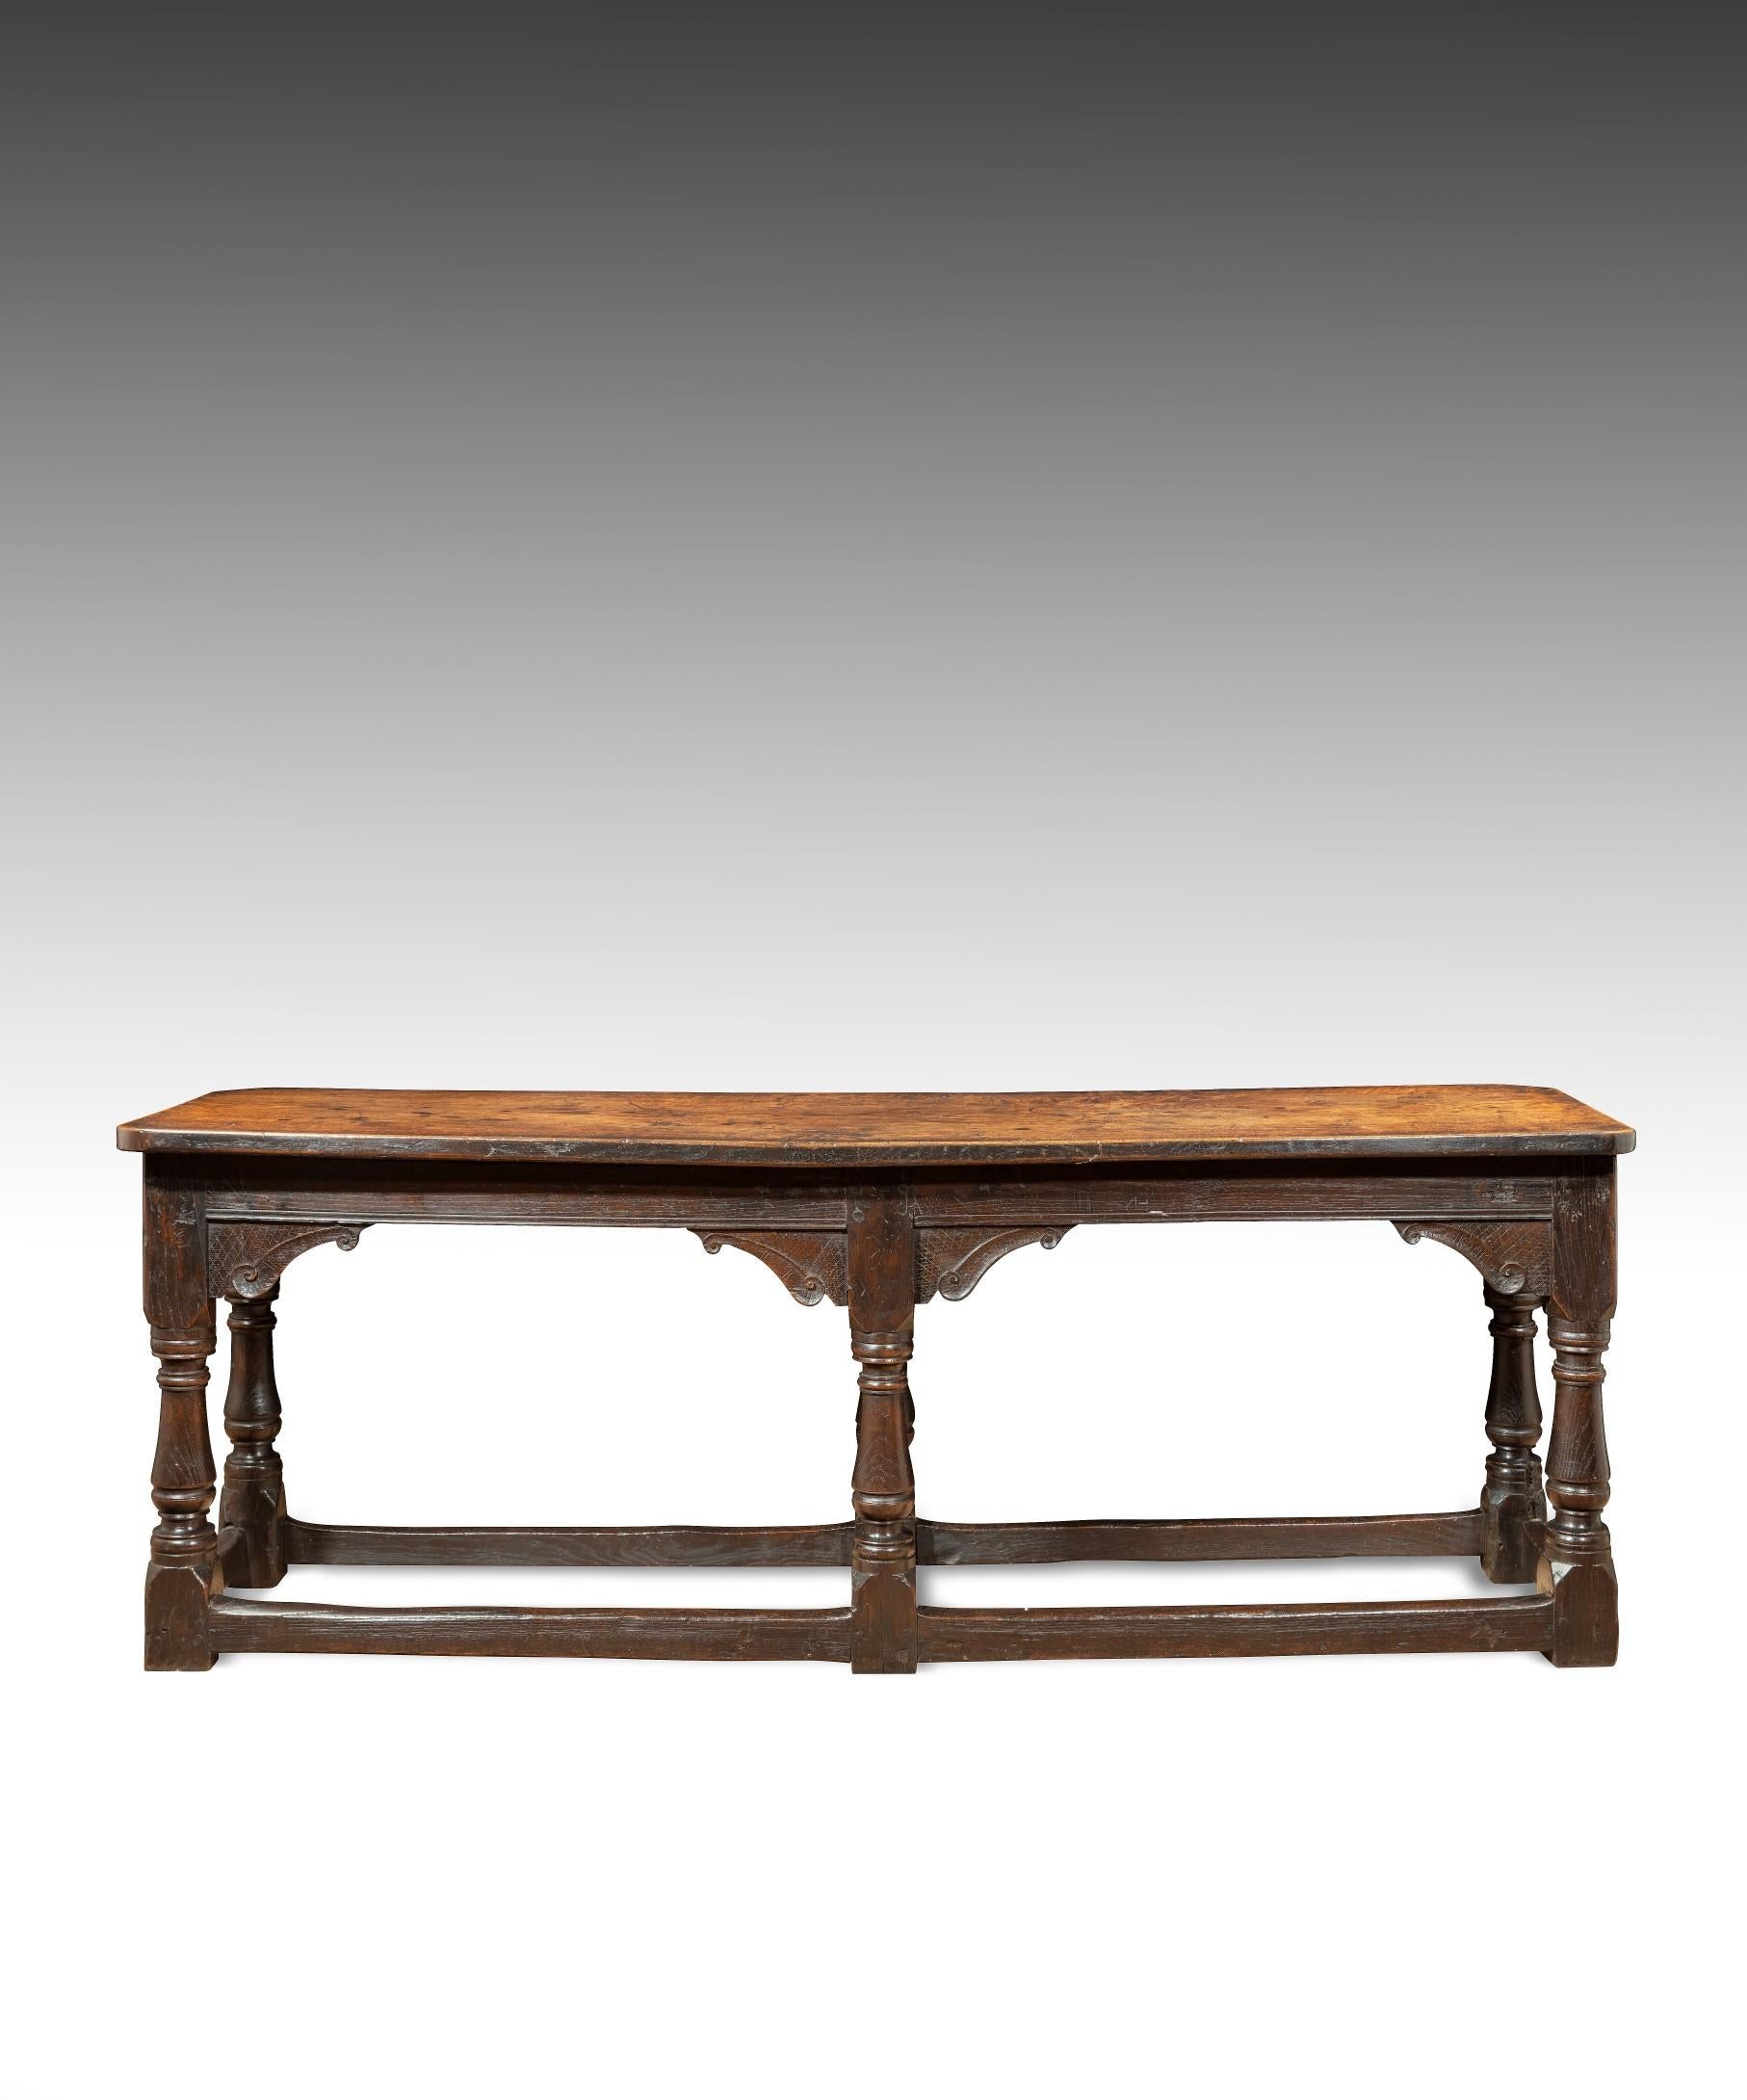 English James I Carved Oak Six-Leg Refectory Table For Sale